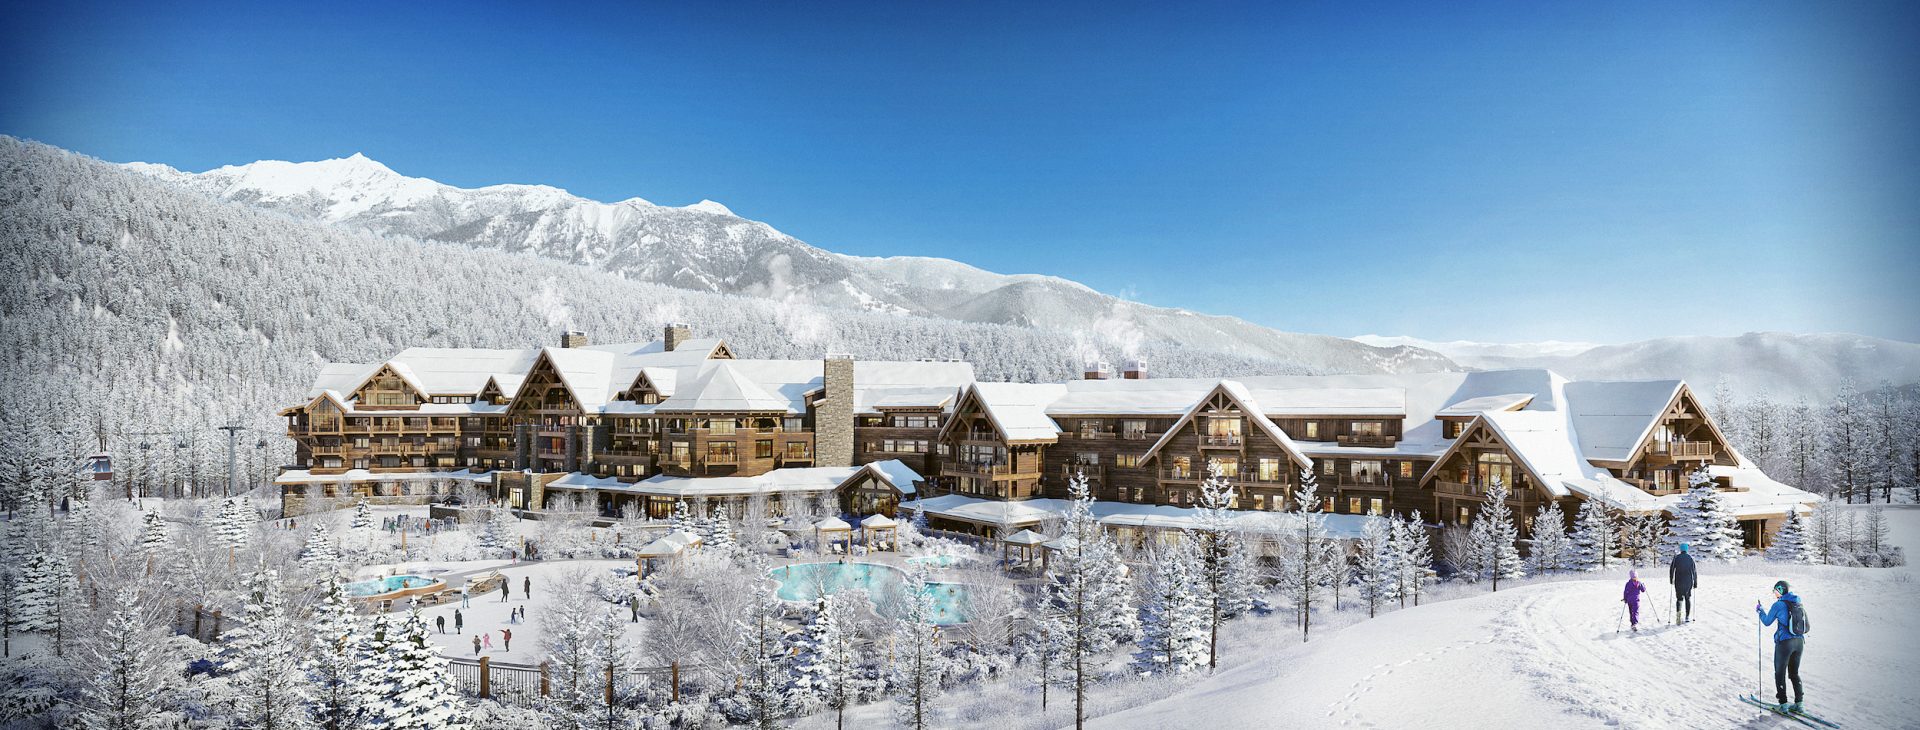 Announcing Montage Big Sky, Opening in 2021